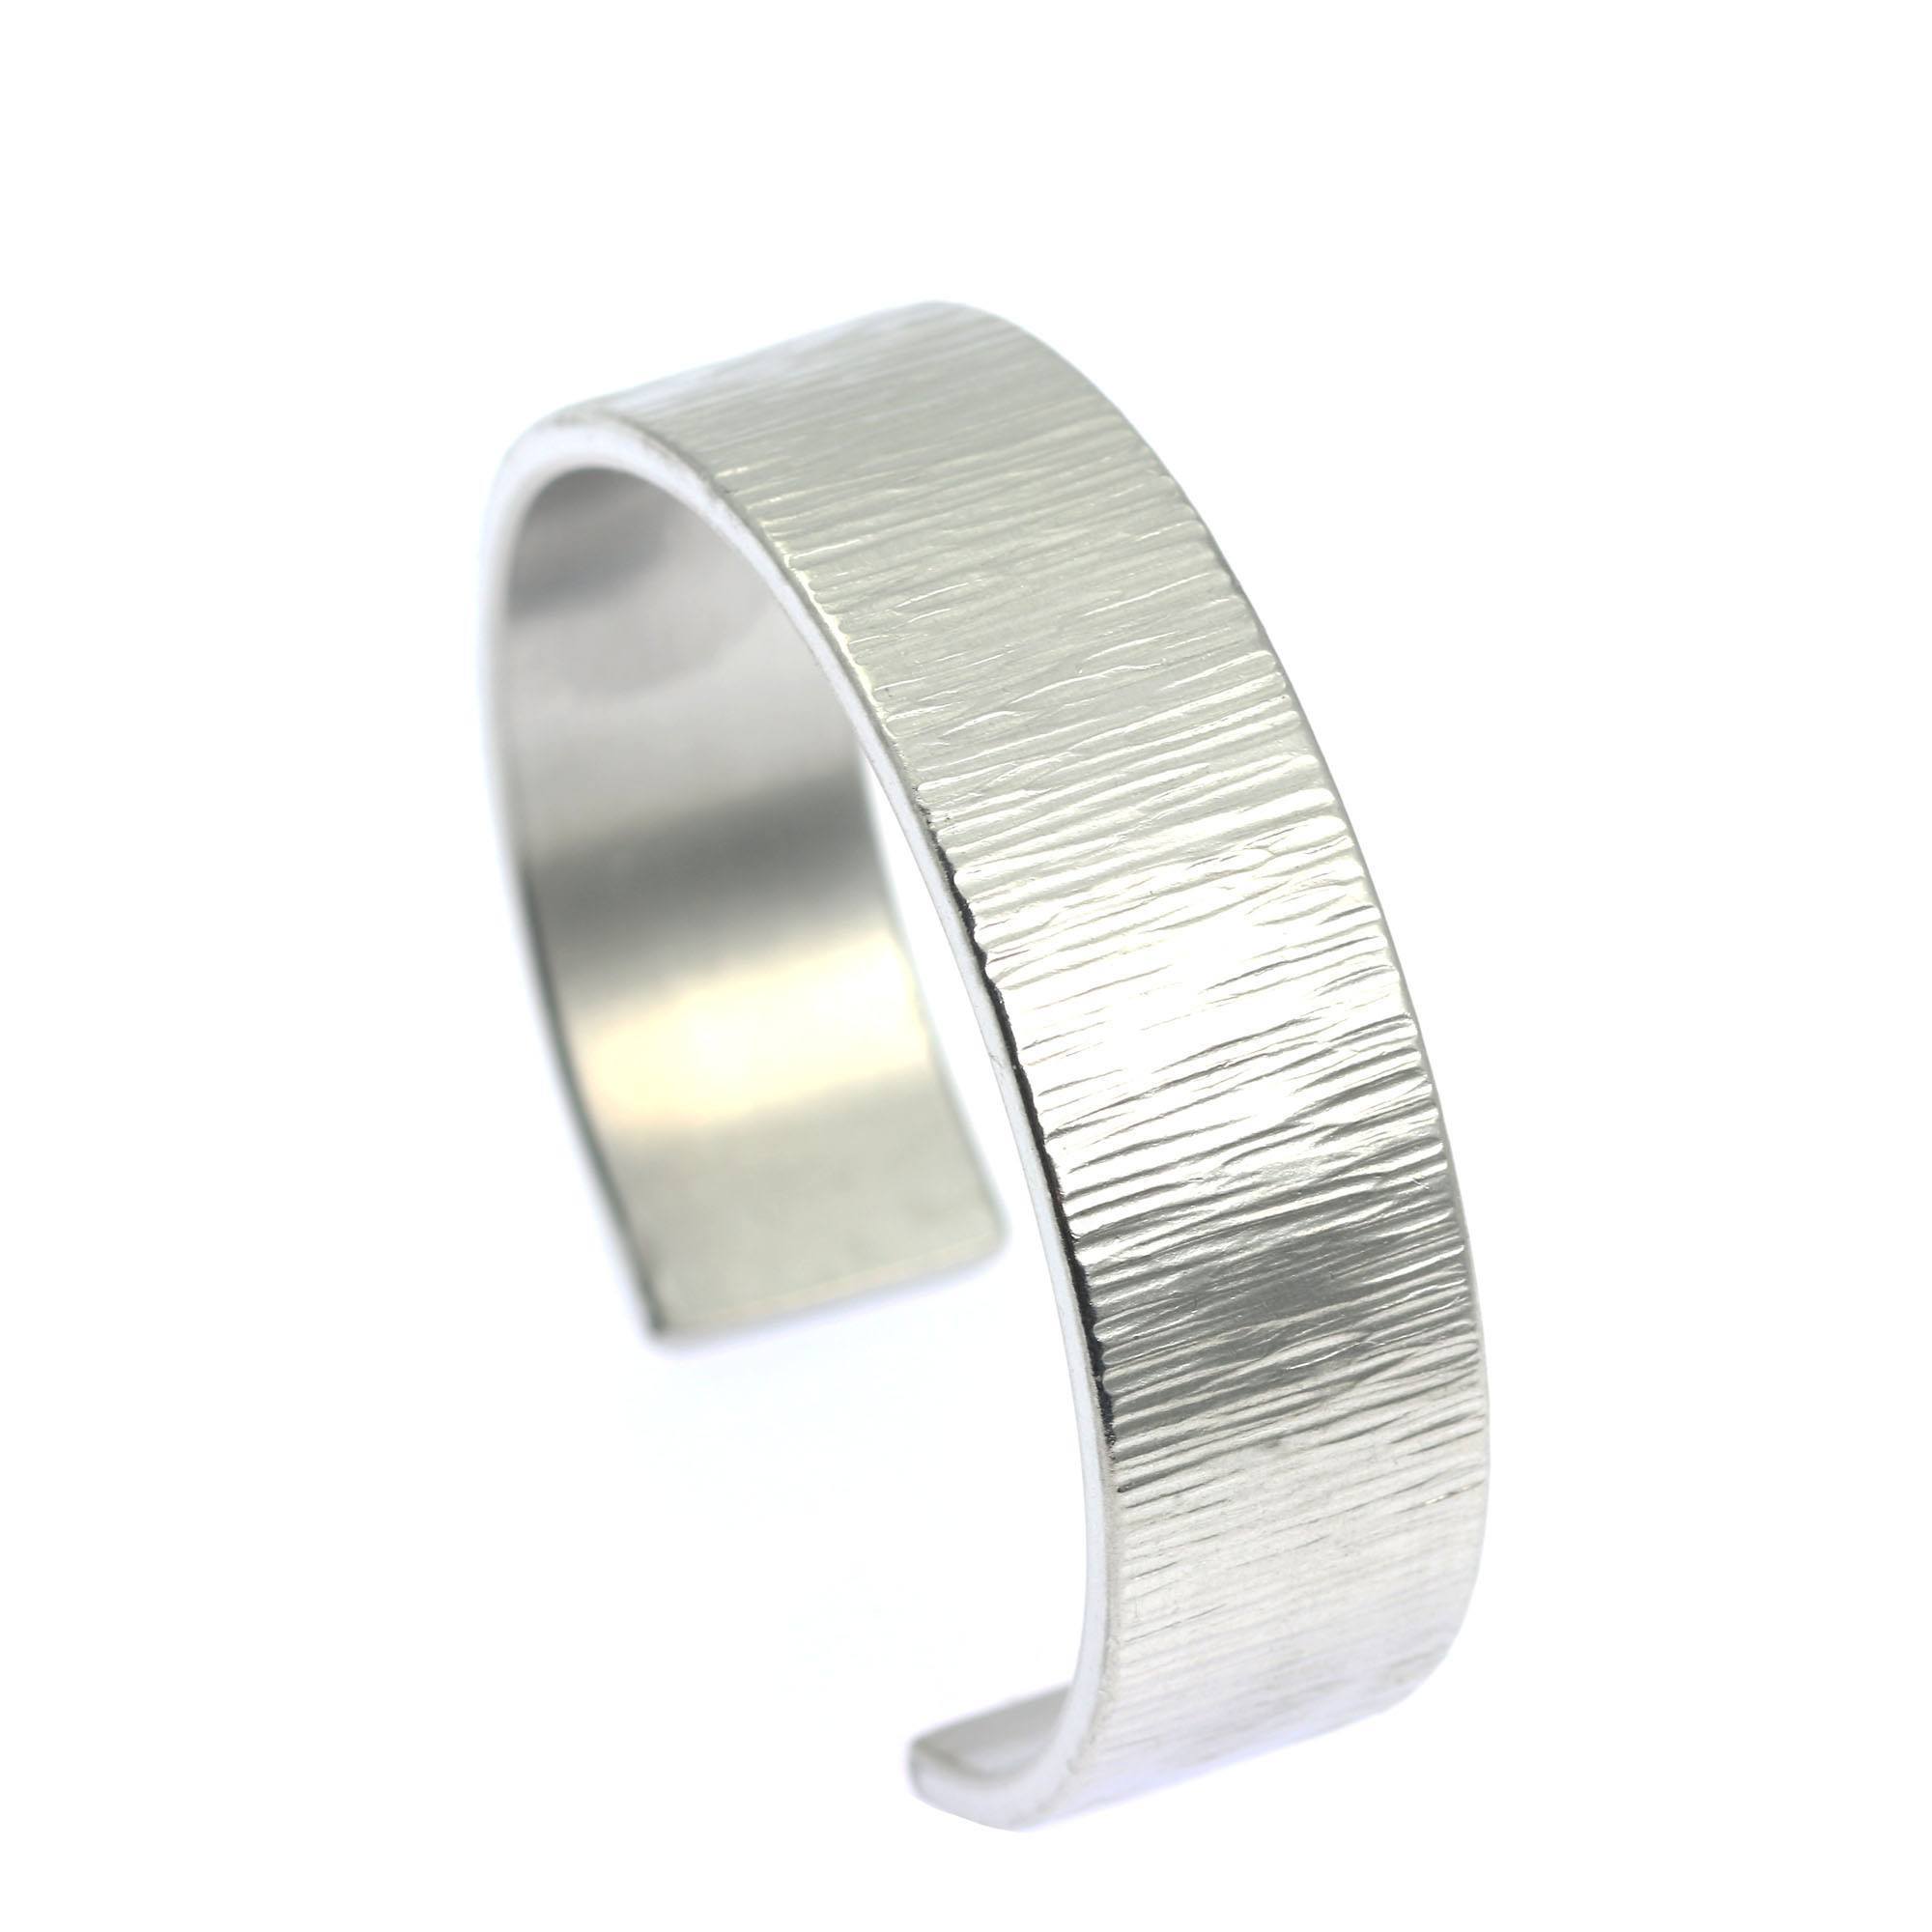 Right View of Chased Aluminum Cuff Bracelet